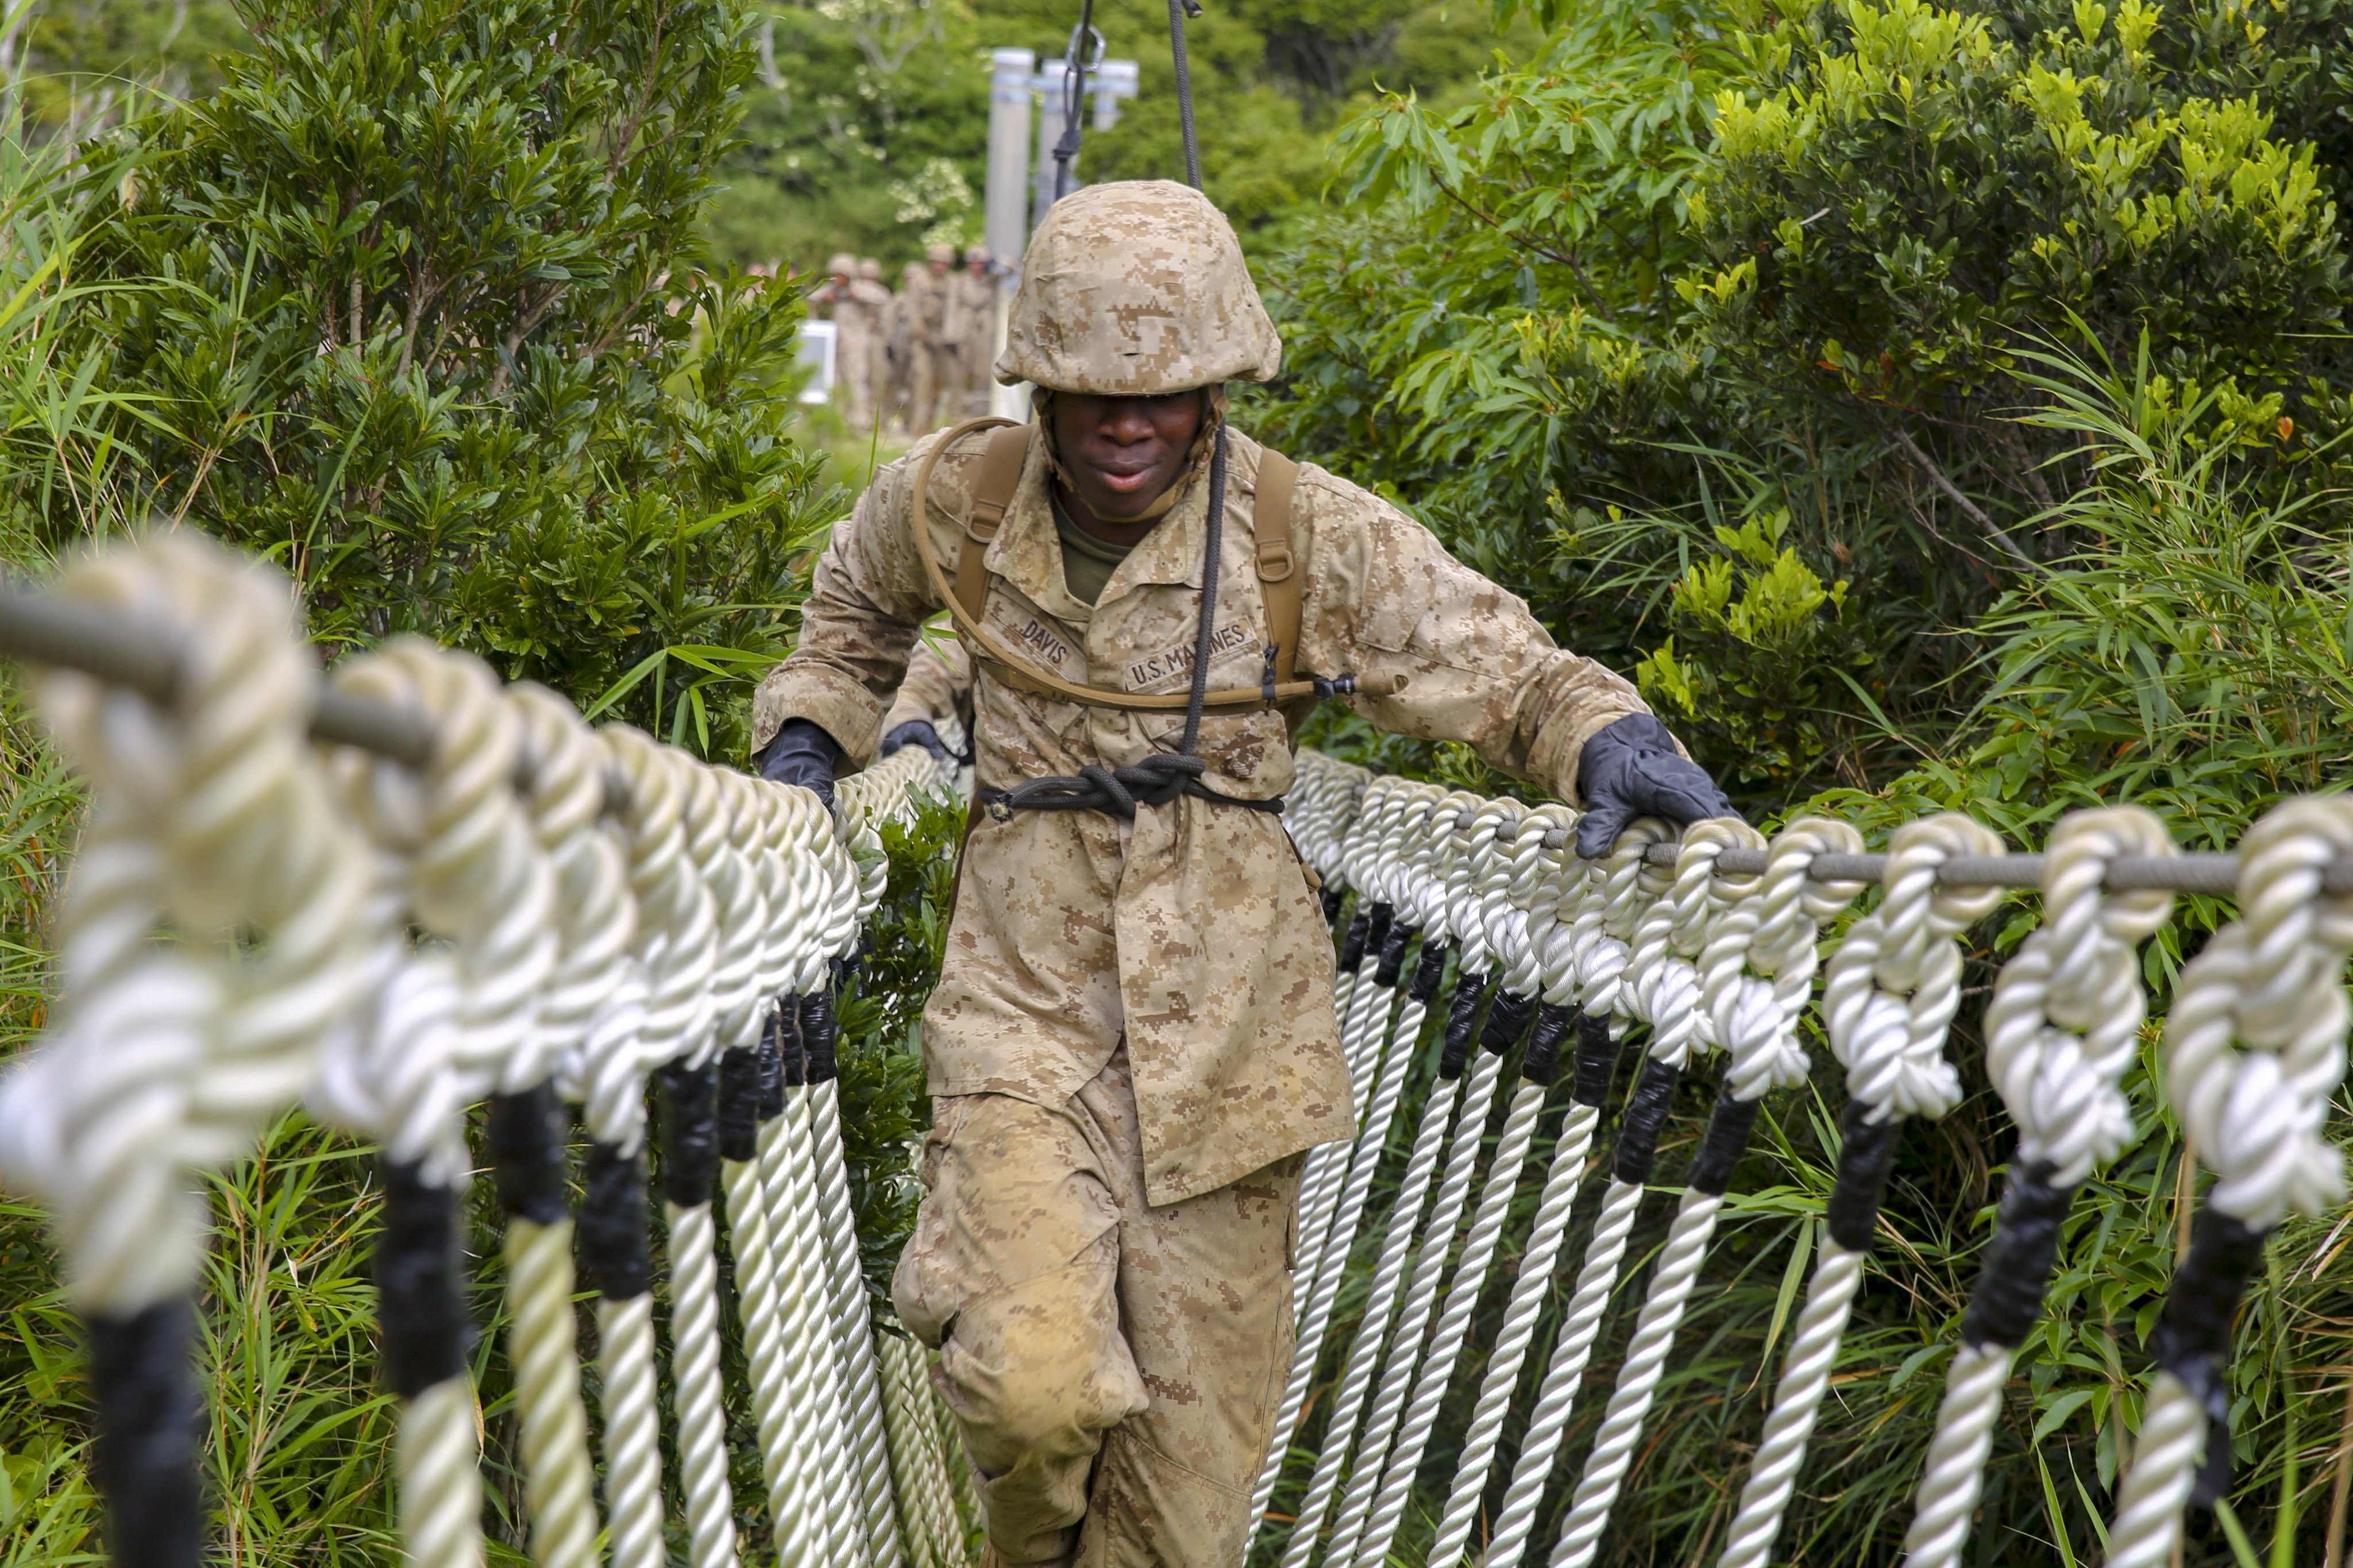 Department of Defense 🇺🇸 on X: #TuesdayTraining: A @USMC #Marine crosses  a rope bridge during jungle survival training in #Okinawa, #Japan 🇯🇵.  #KnowYourMil  / X